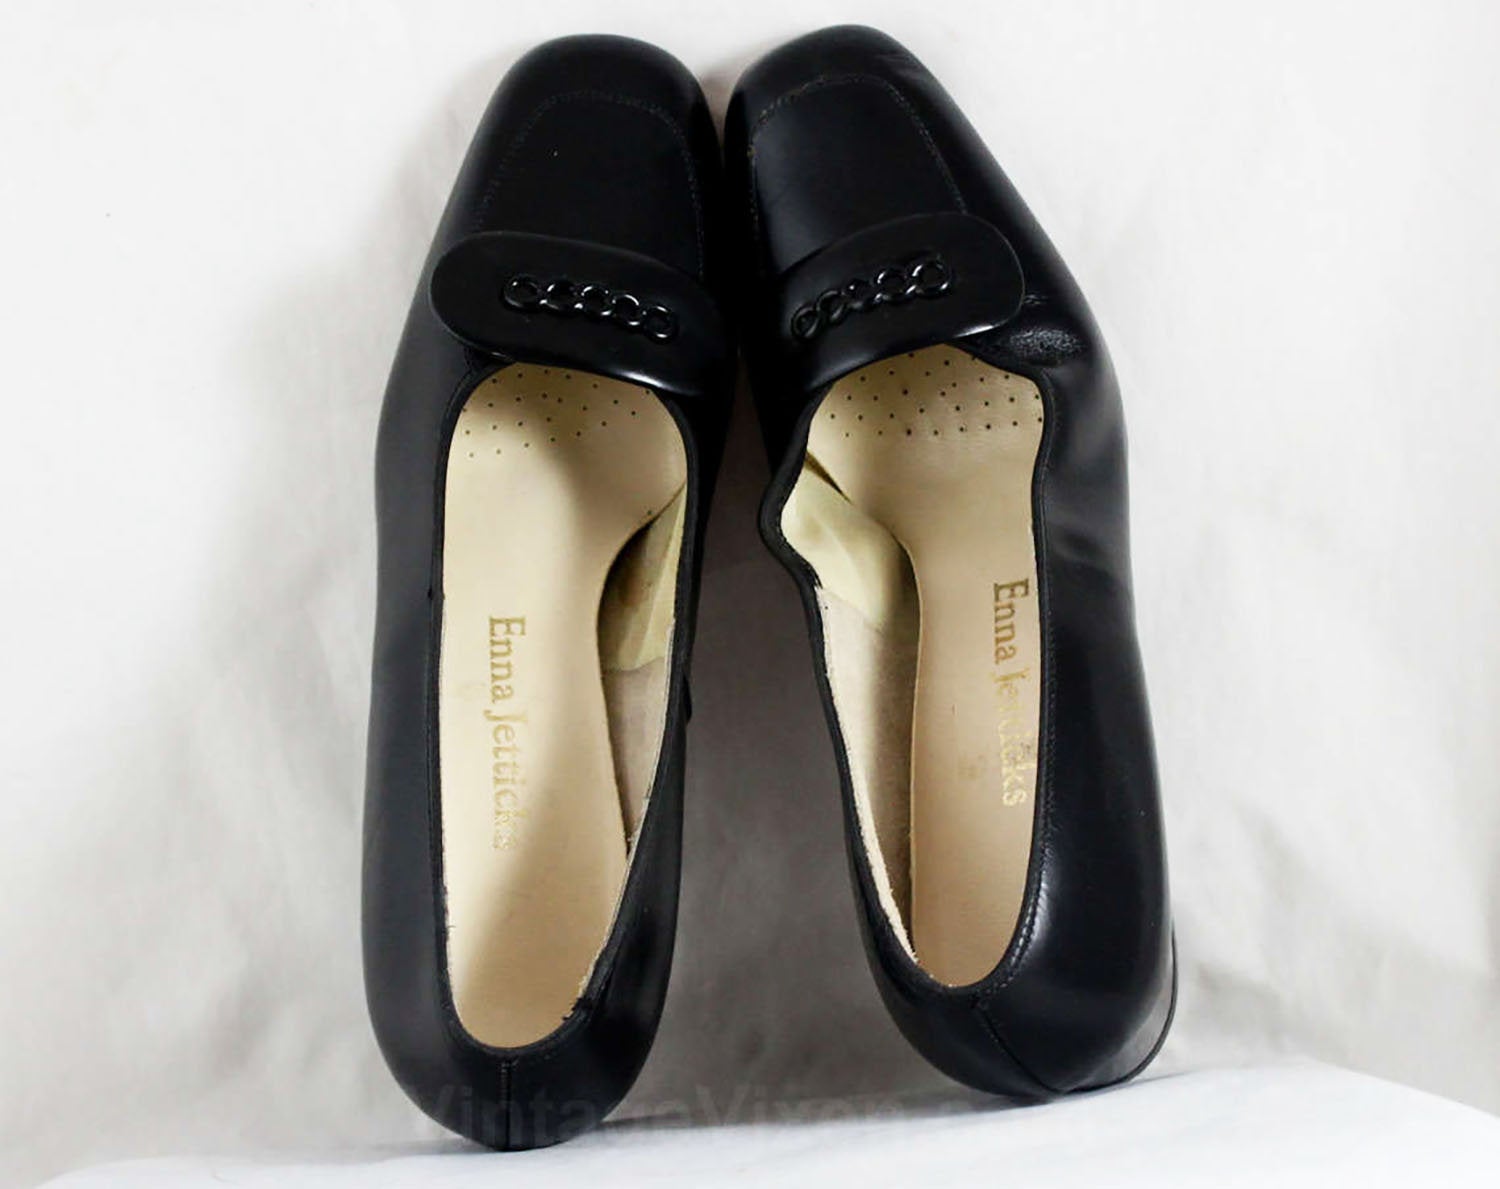 Size 8 Black Shoes - Glossy Faux Patent Leather 1960s Pumps with Deco ...